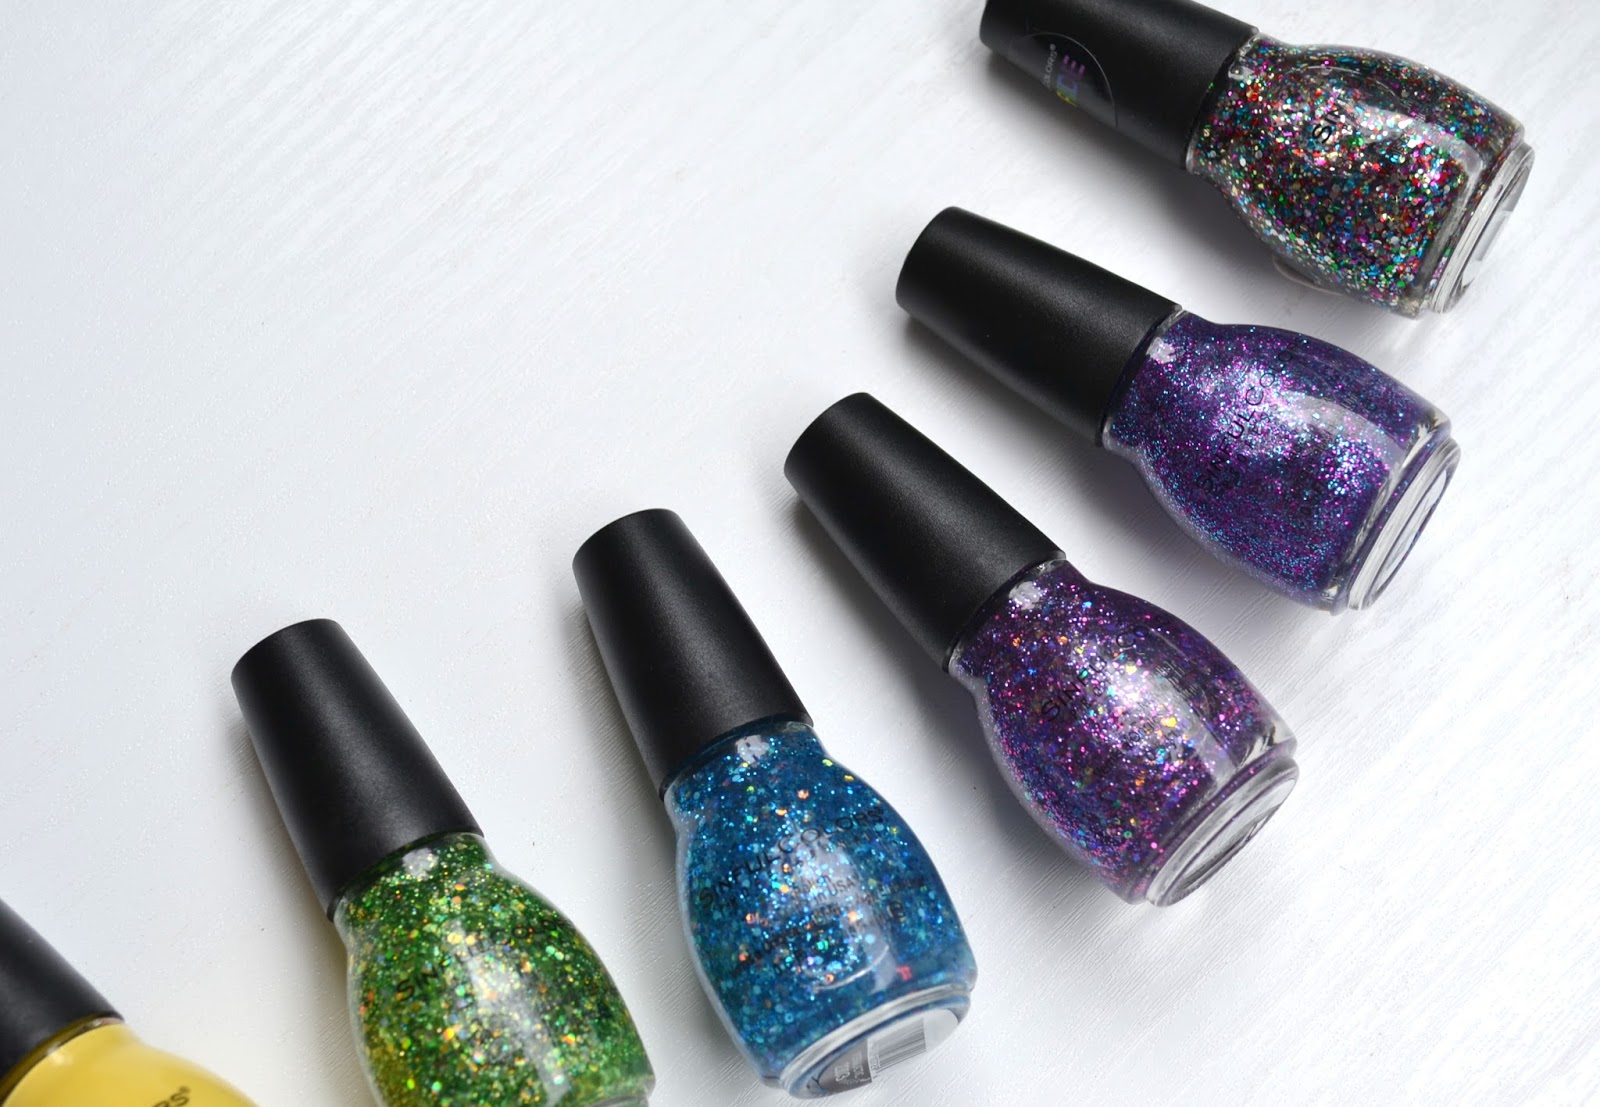 2. Sinful Colors Nail Polish Designs for Short Nails - wide 3